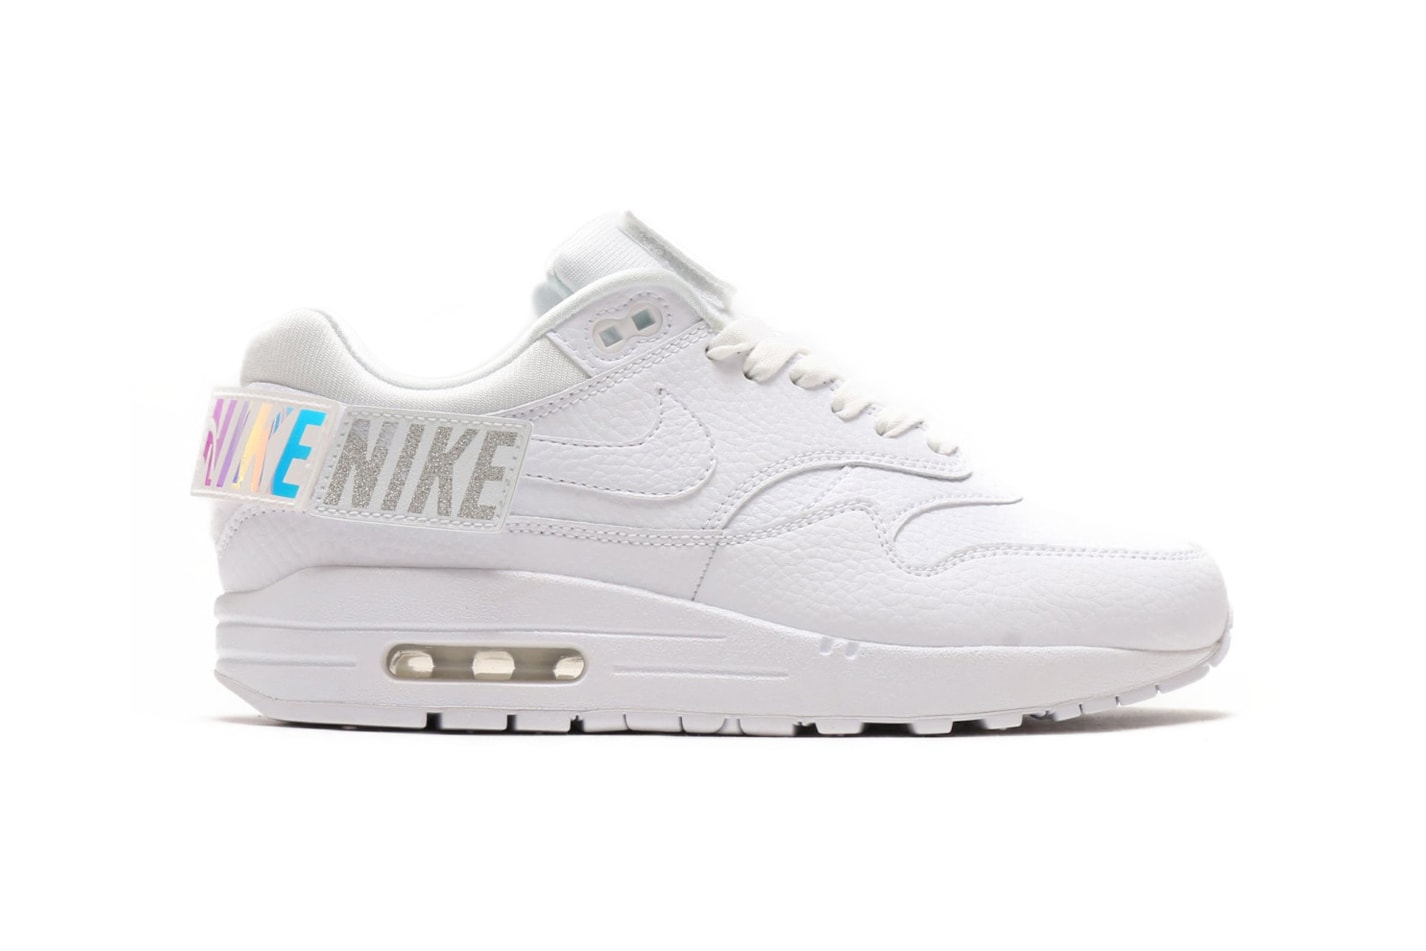 Nike Air Max 1 100 Triple White velcro patches customizable may 2018 release date info drop sneakers shoes footwear atmos